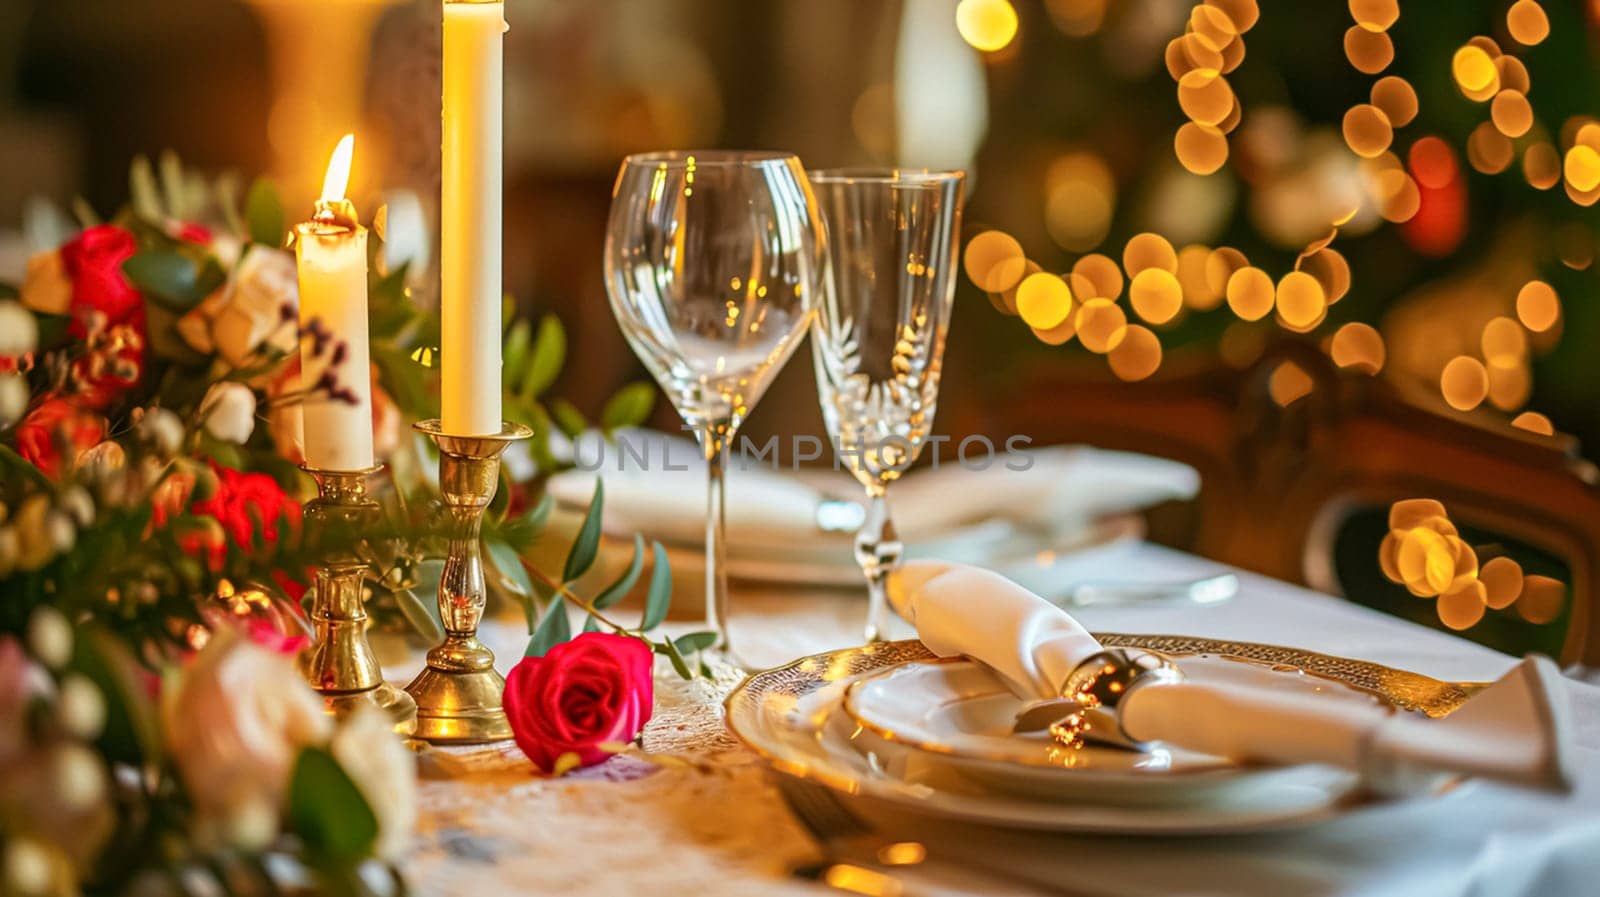 Festive table setting with cutlery, candles and beautiful red flowers in vase by Olayola